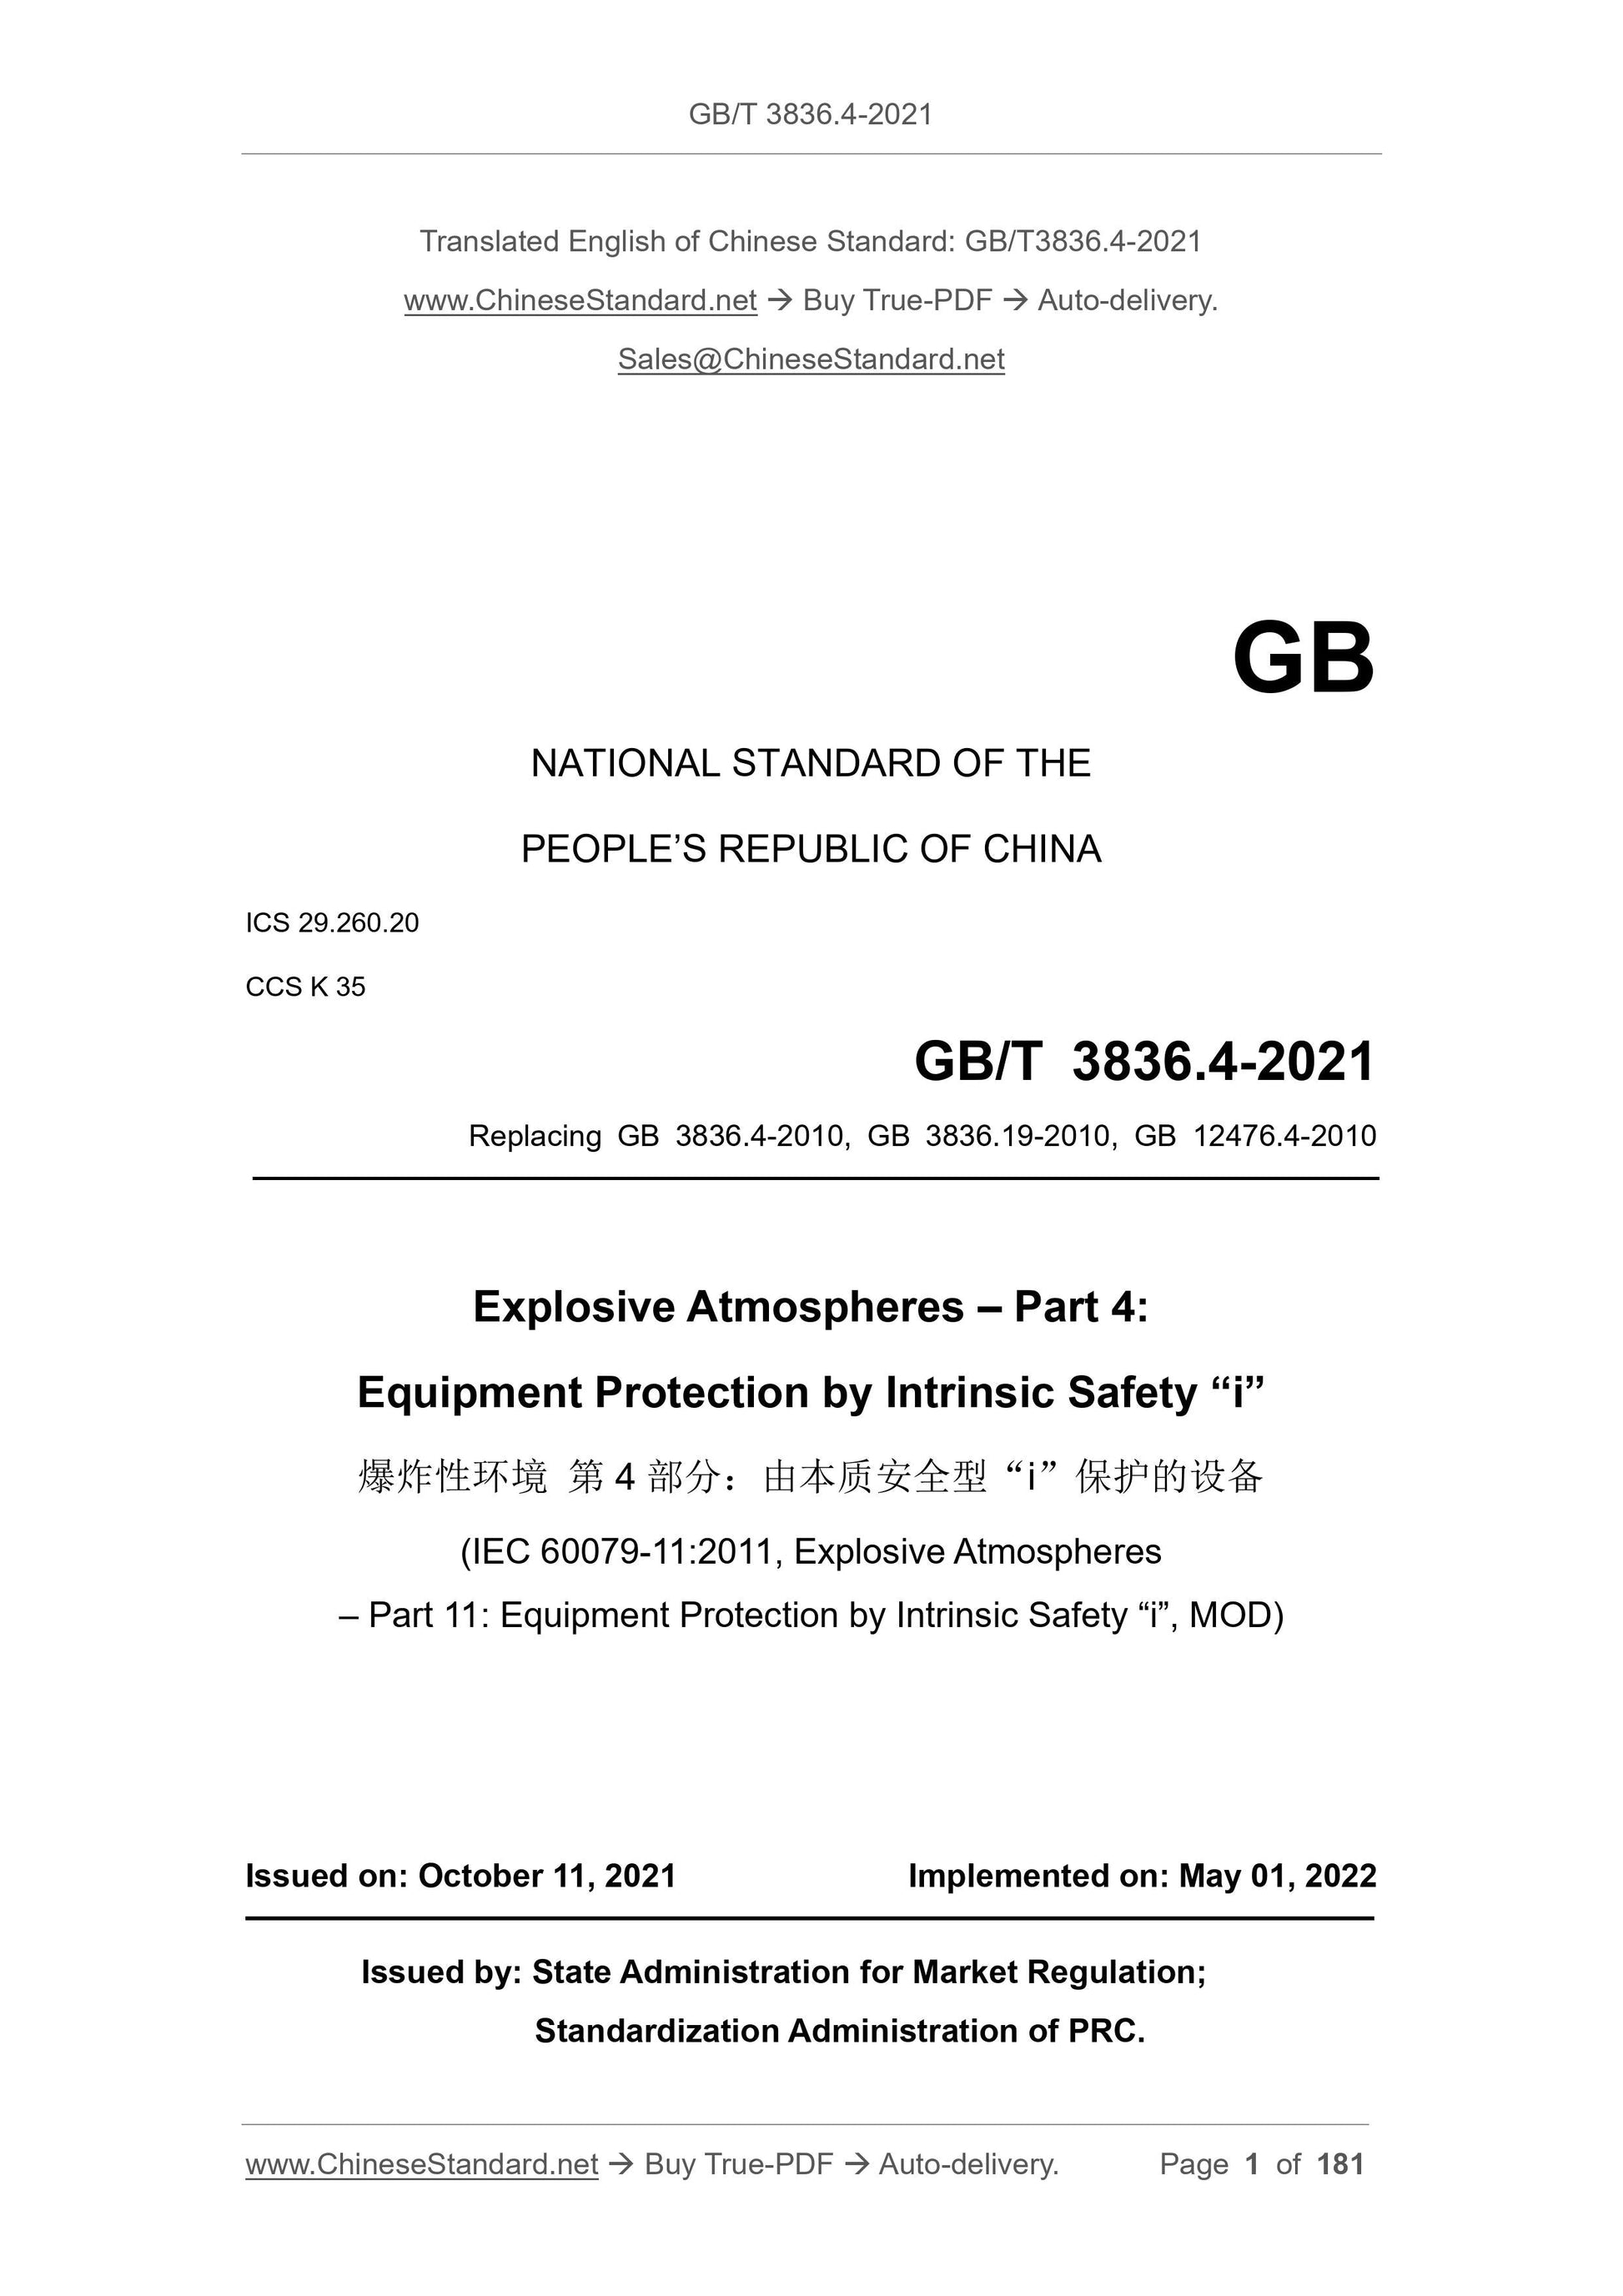 GB/T 3836.4-2021 Page 1